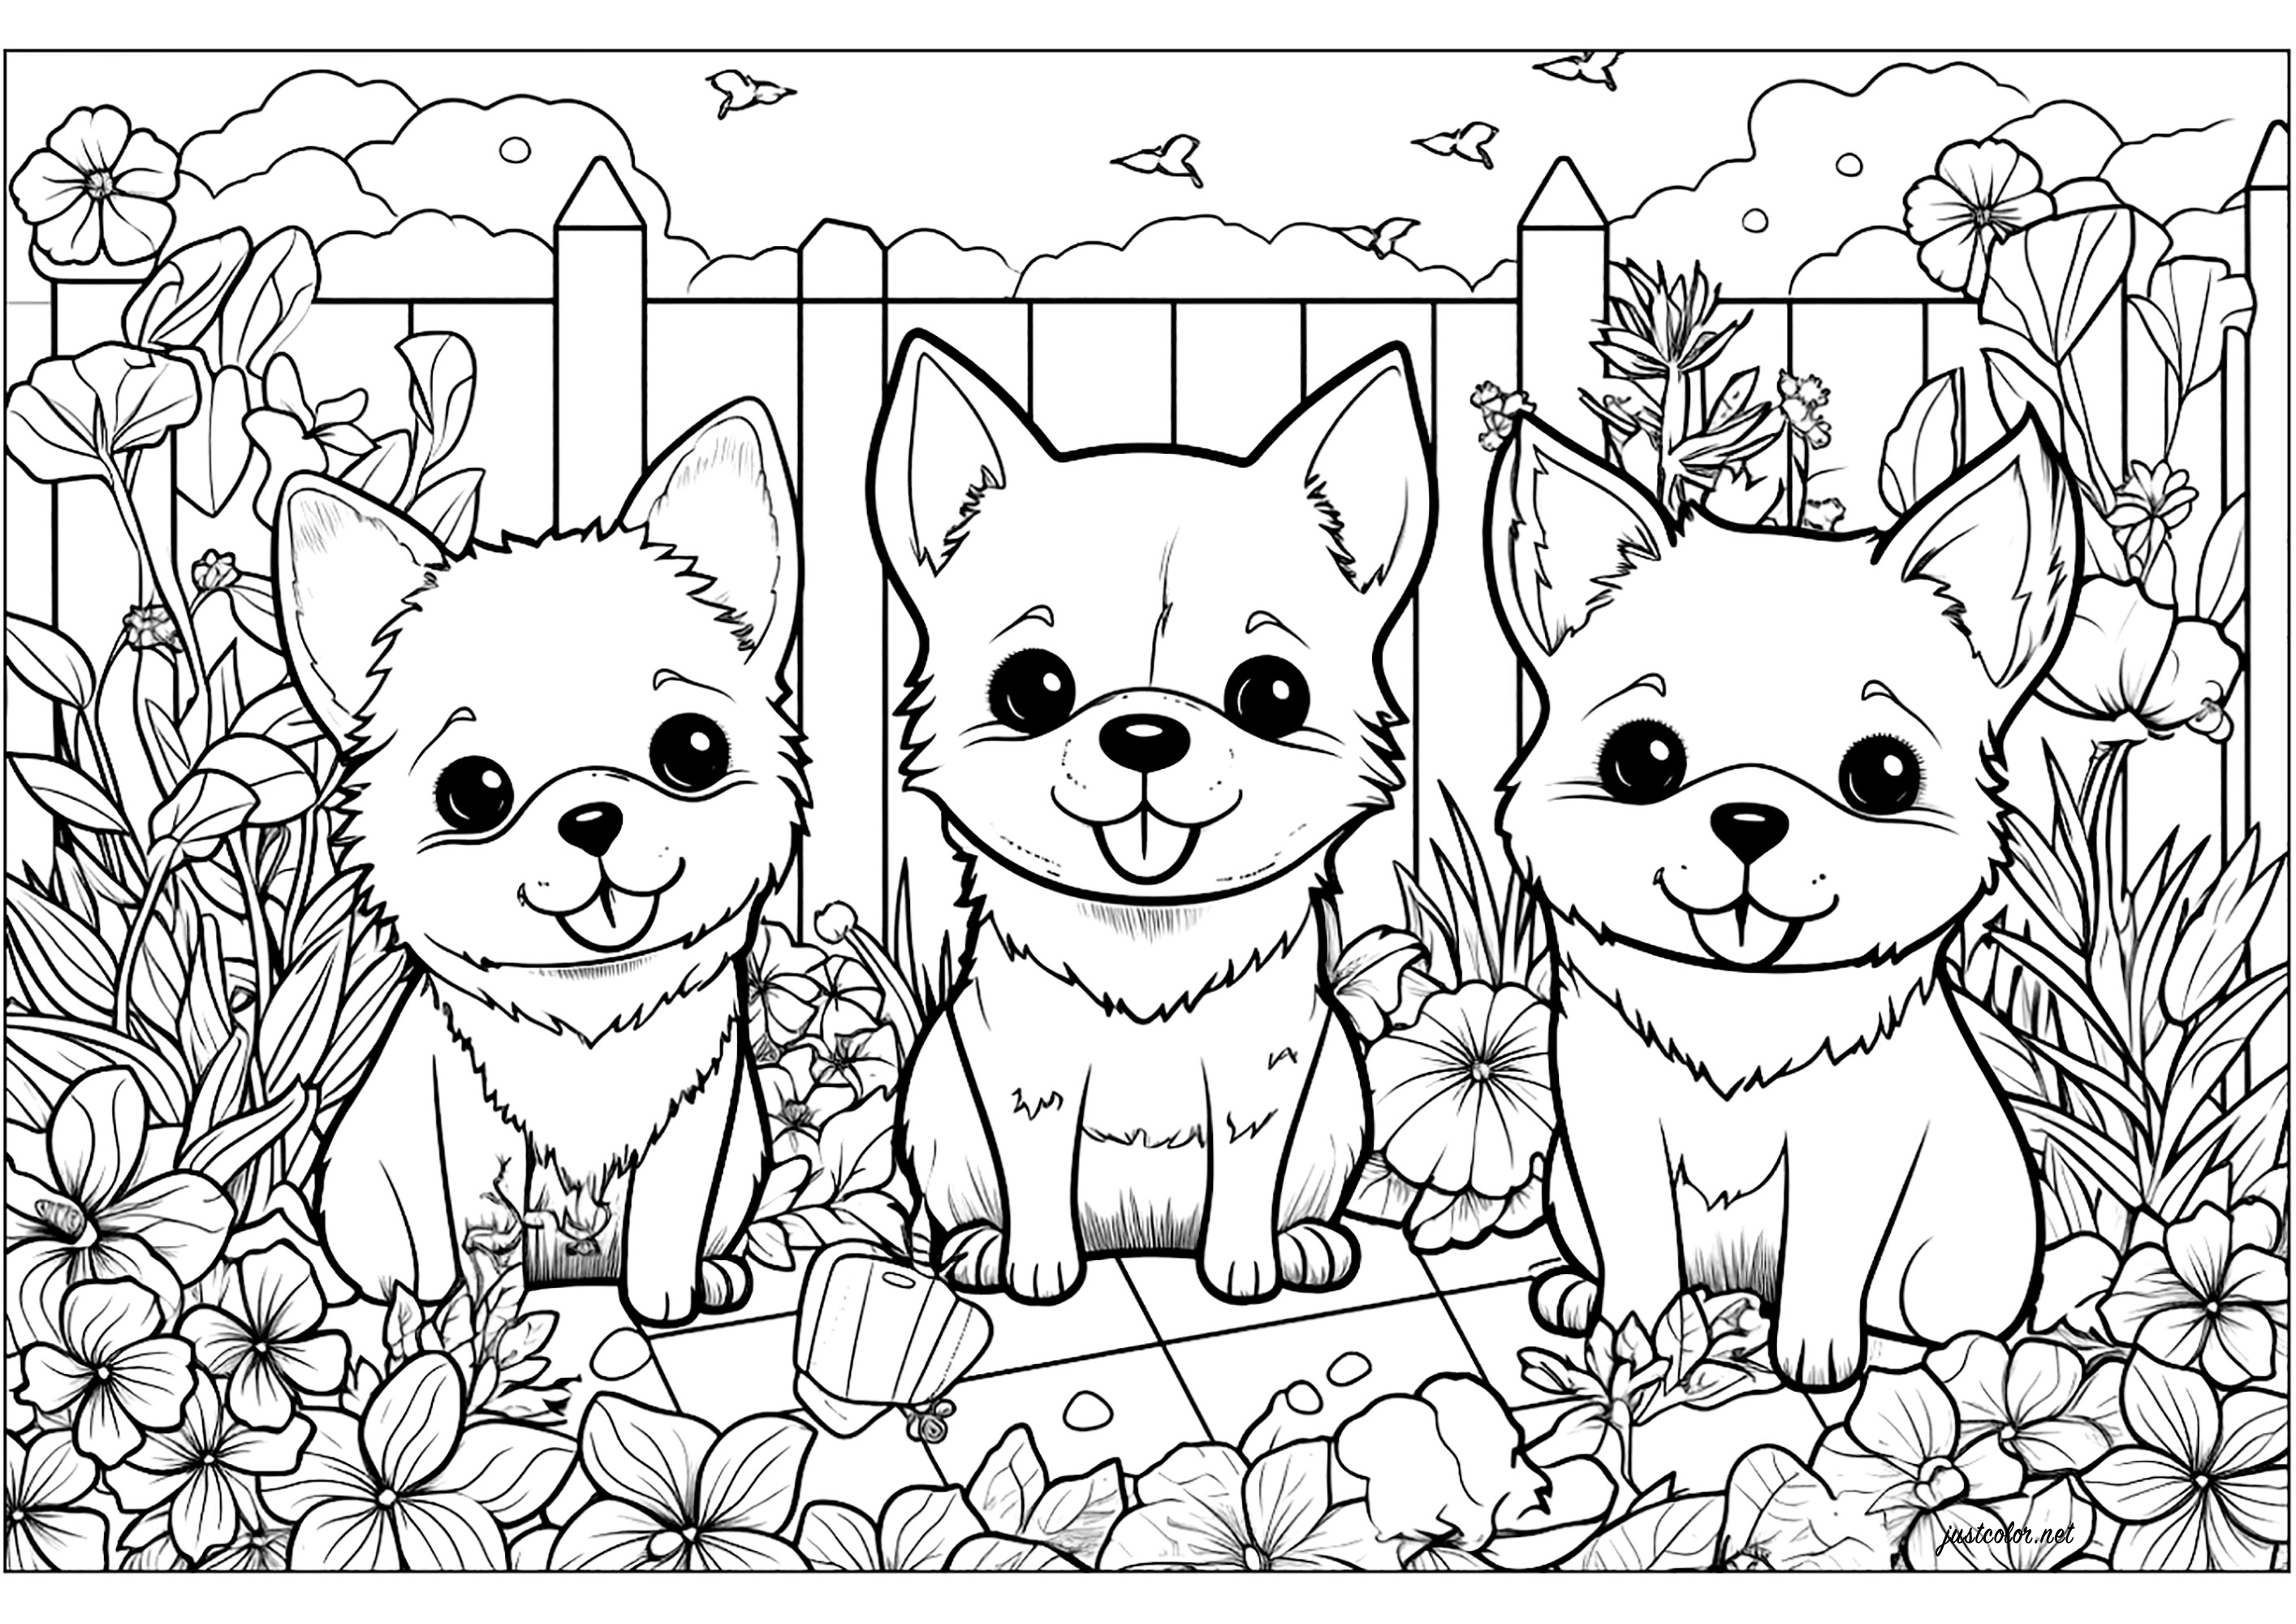 Three cute puppies surrounded by flowers